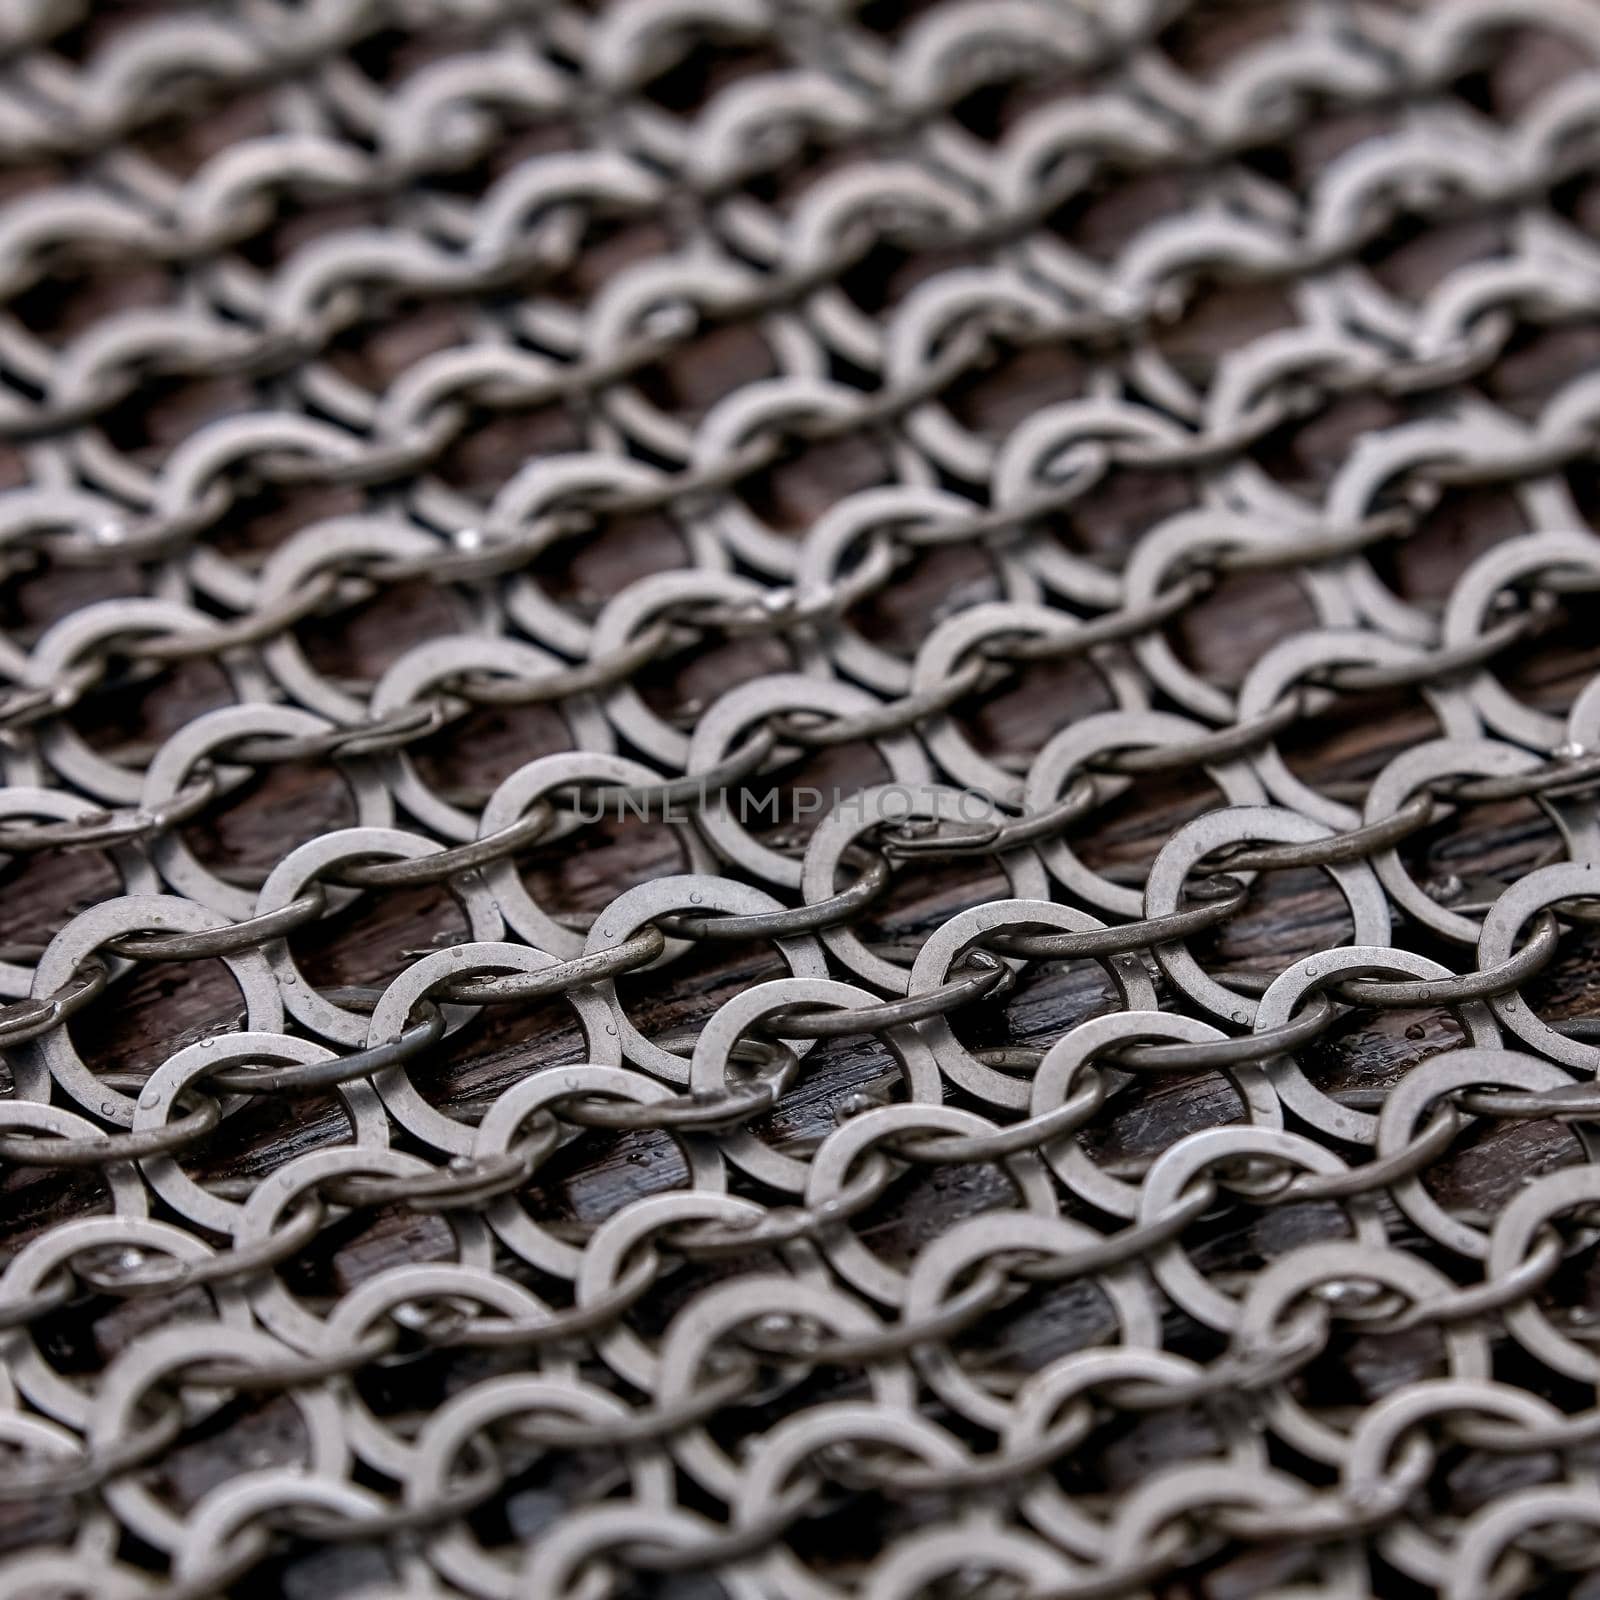 Chain-mail or Hauberk texture, metal protective armor of medieval or middle ages times. Hauberk medieval knight equipment shirt of ring mail by EvgeniyQW